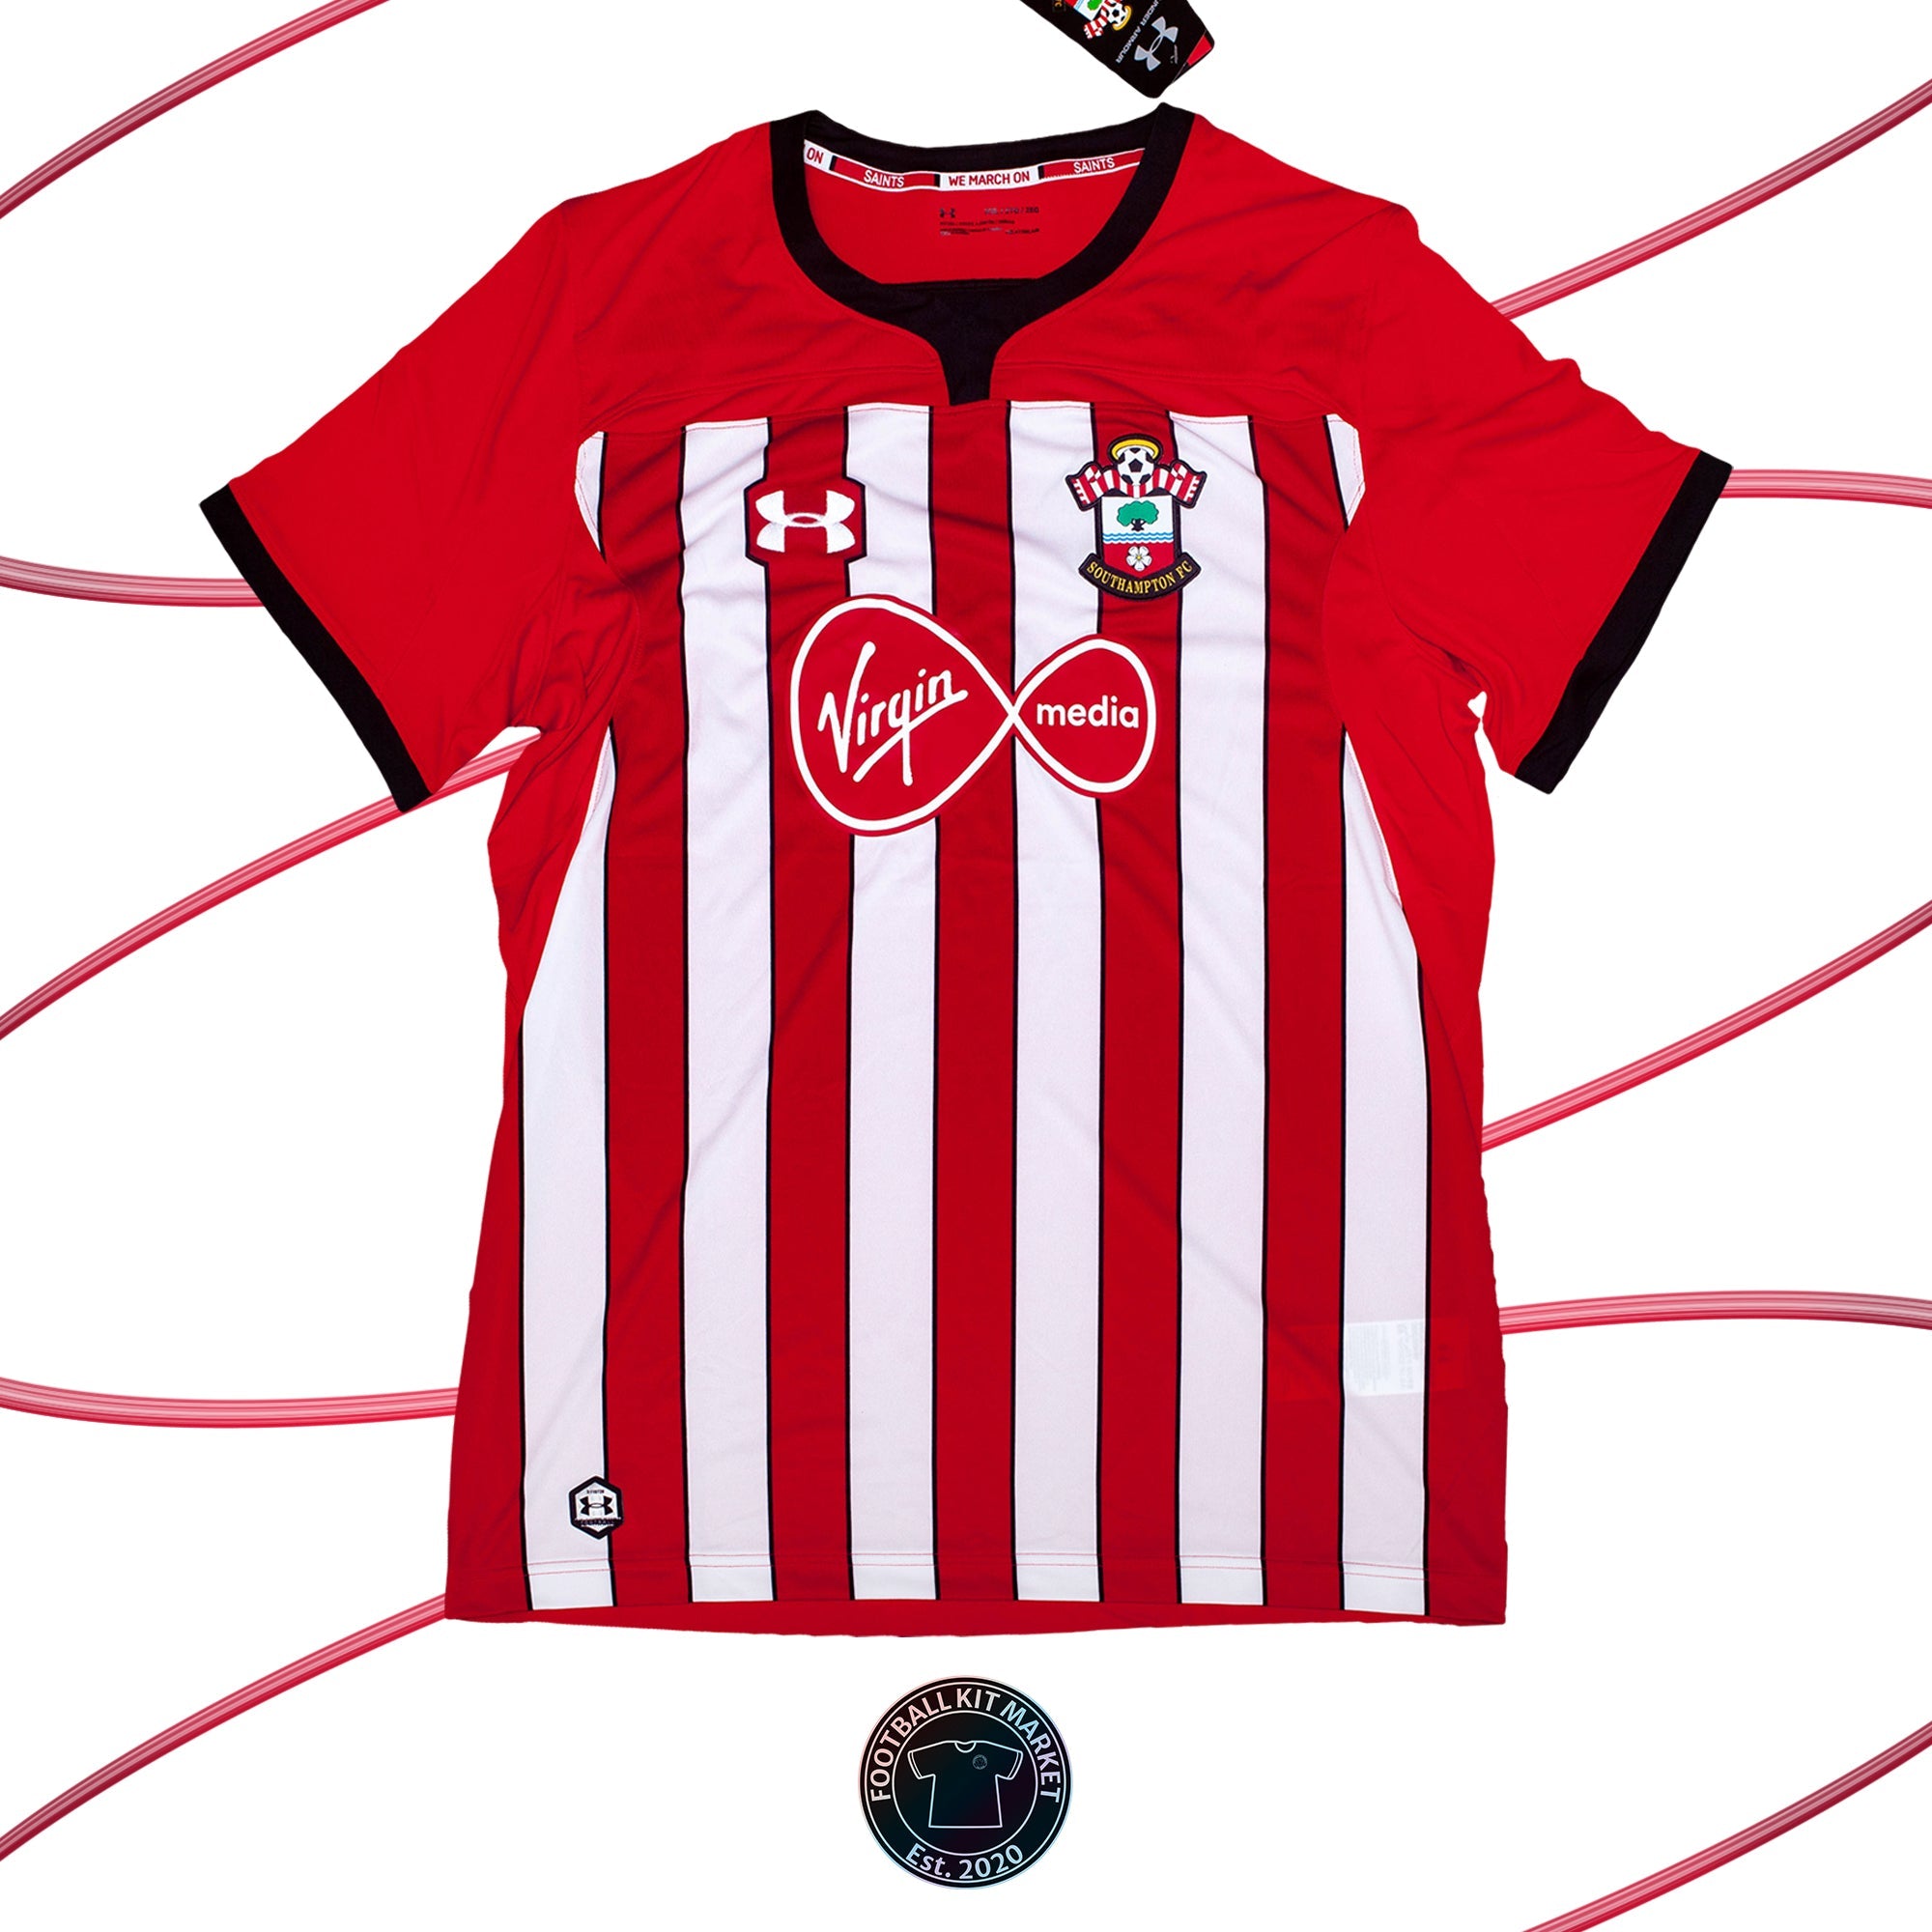 Genuine SOUTHAMPTON Home Shirt (2018-2019) - UNDER ARMOUR (XXL) - Product Image from Football Kit Market